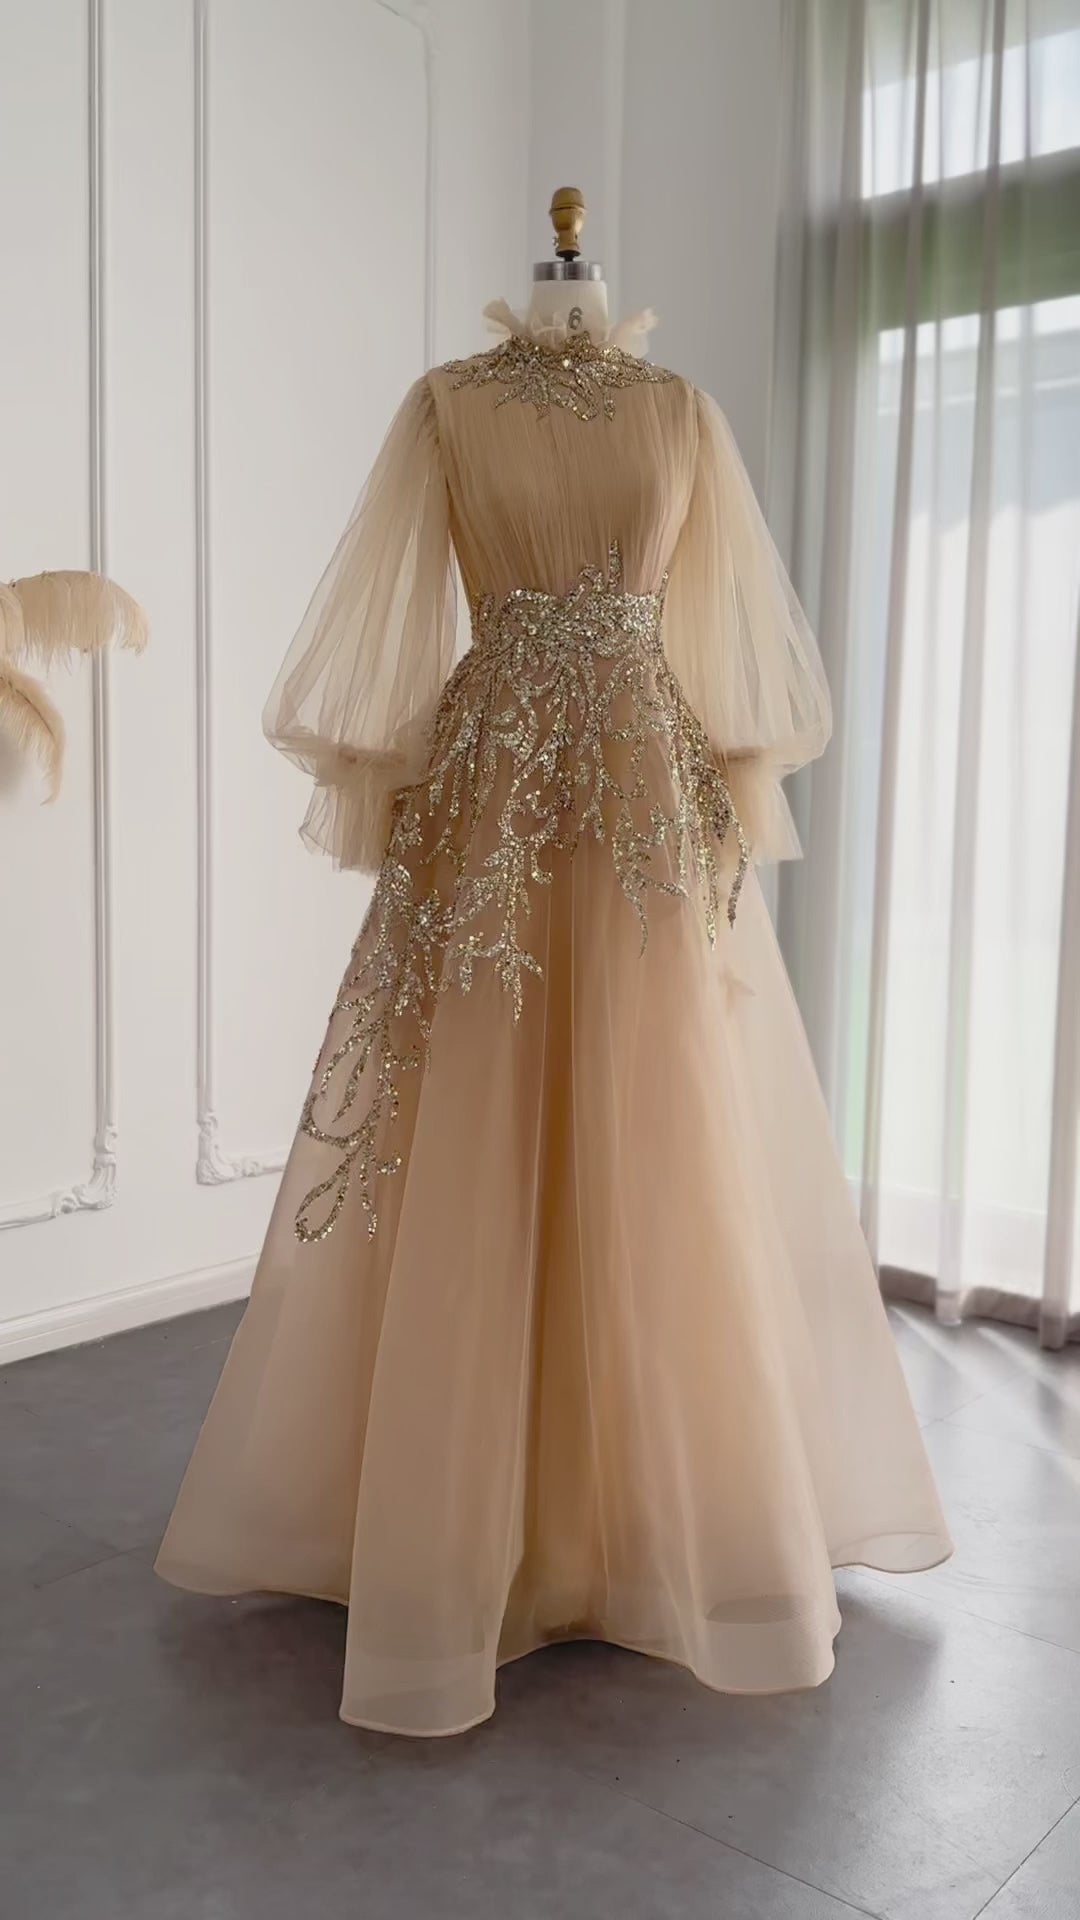 Dreamy Vow Champagne Long Sleeve Muslim Evening Dresses Luxury Dubai Midi Short Arabic Formal Gowns for Wedding Party SS496